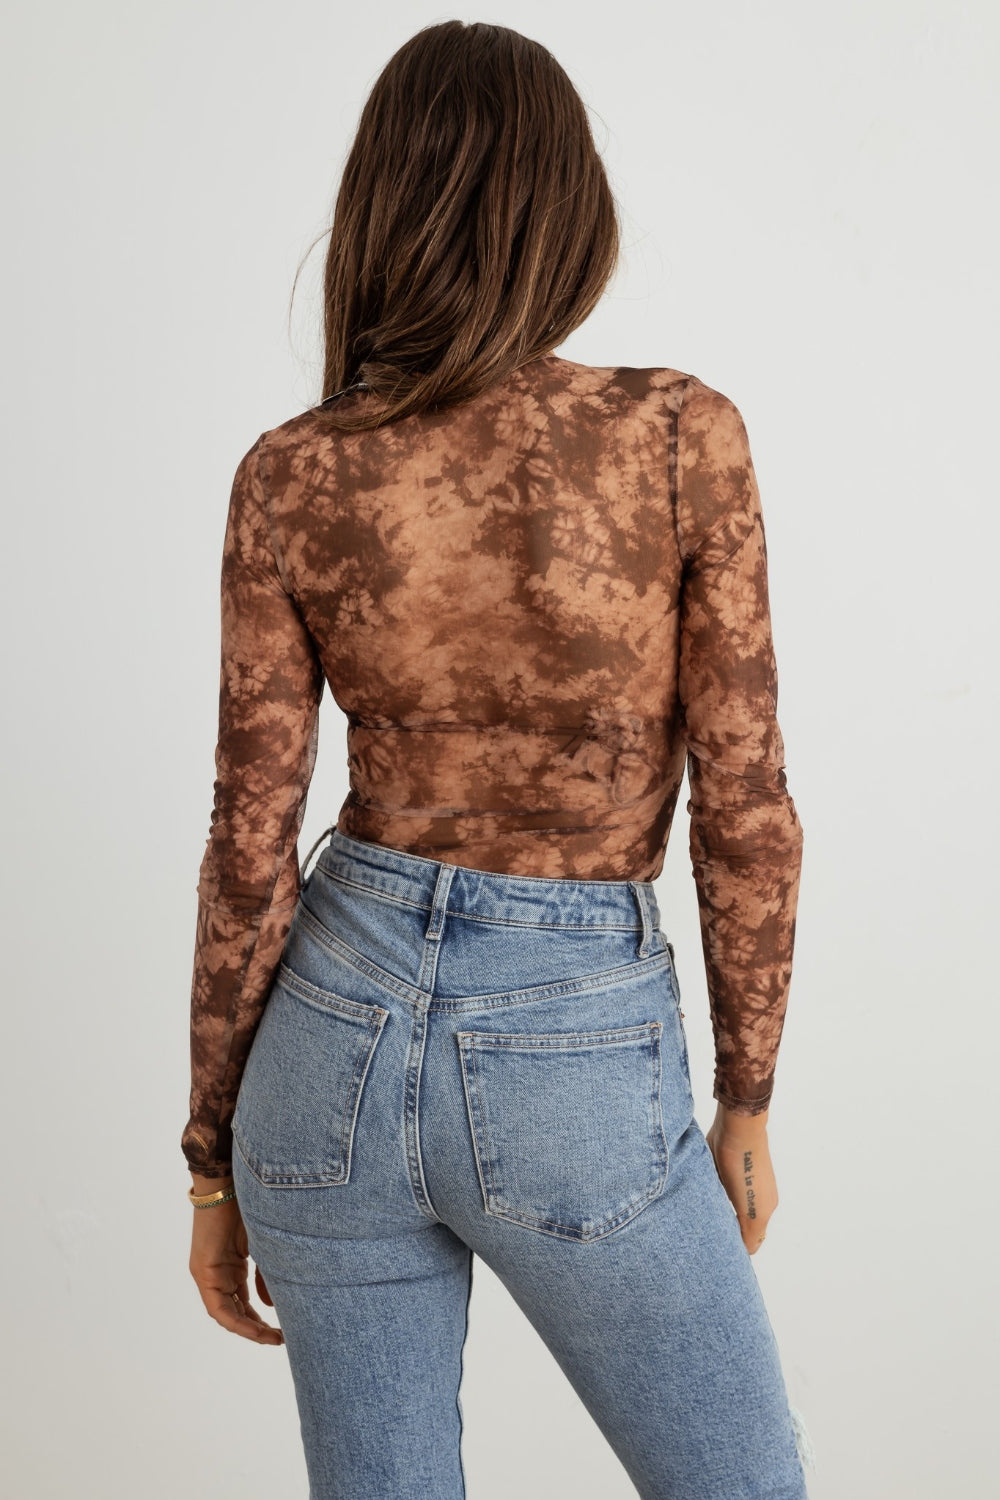 Abstract Mesh Lace-Up Long Sleeve Bodysuit - Trendy Women's Fashion Staple for a Chic Look!